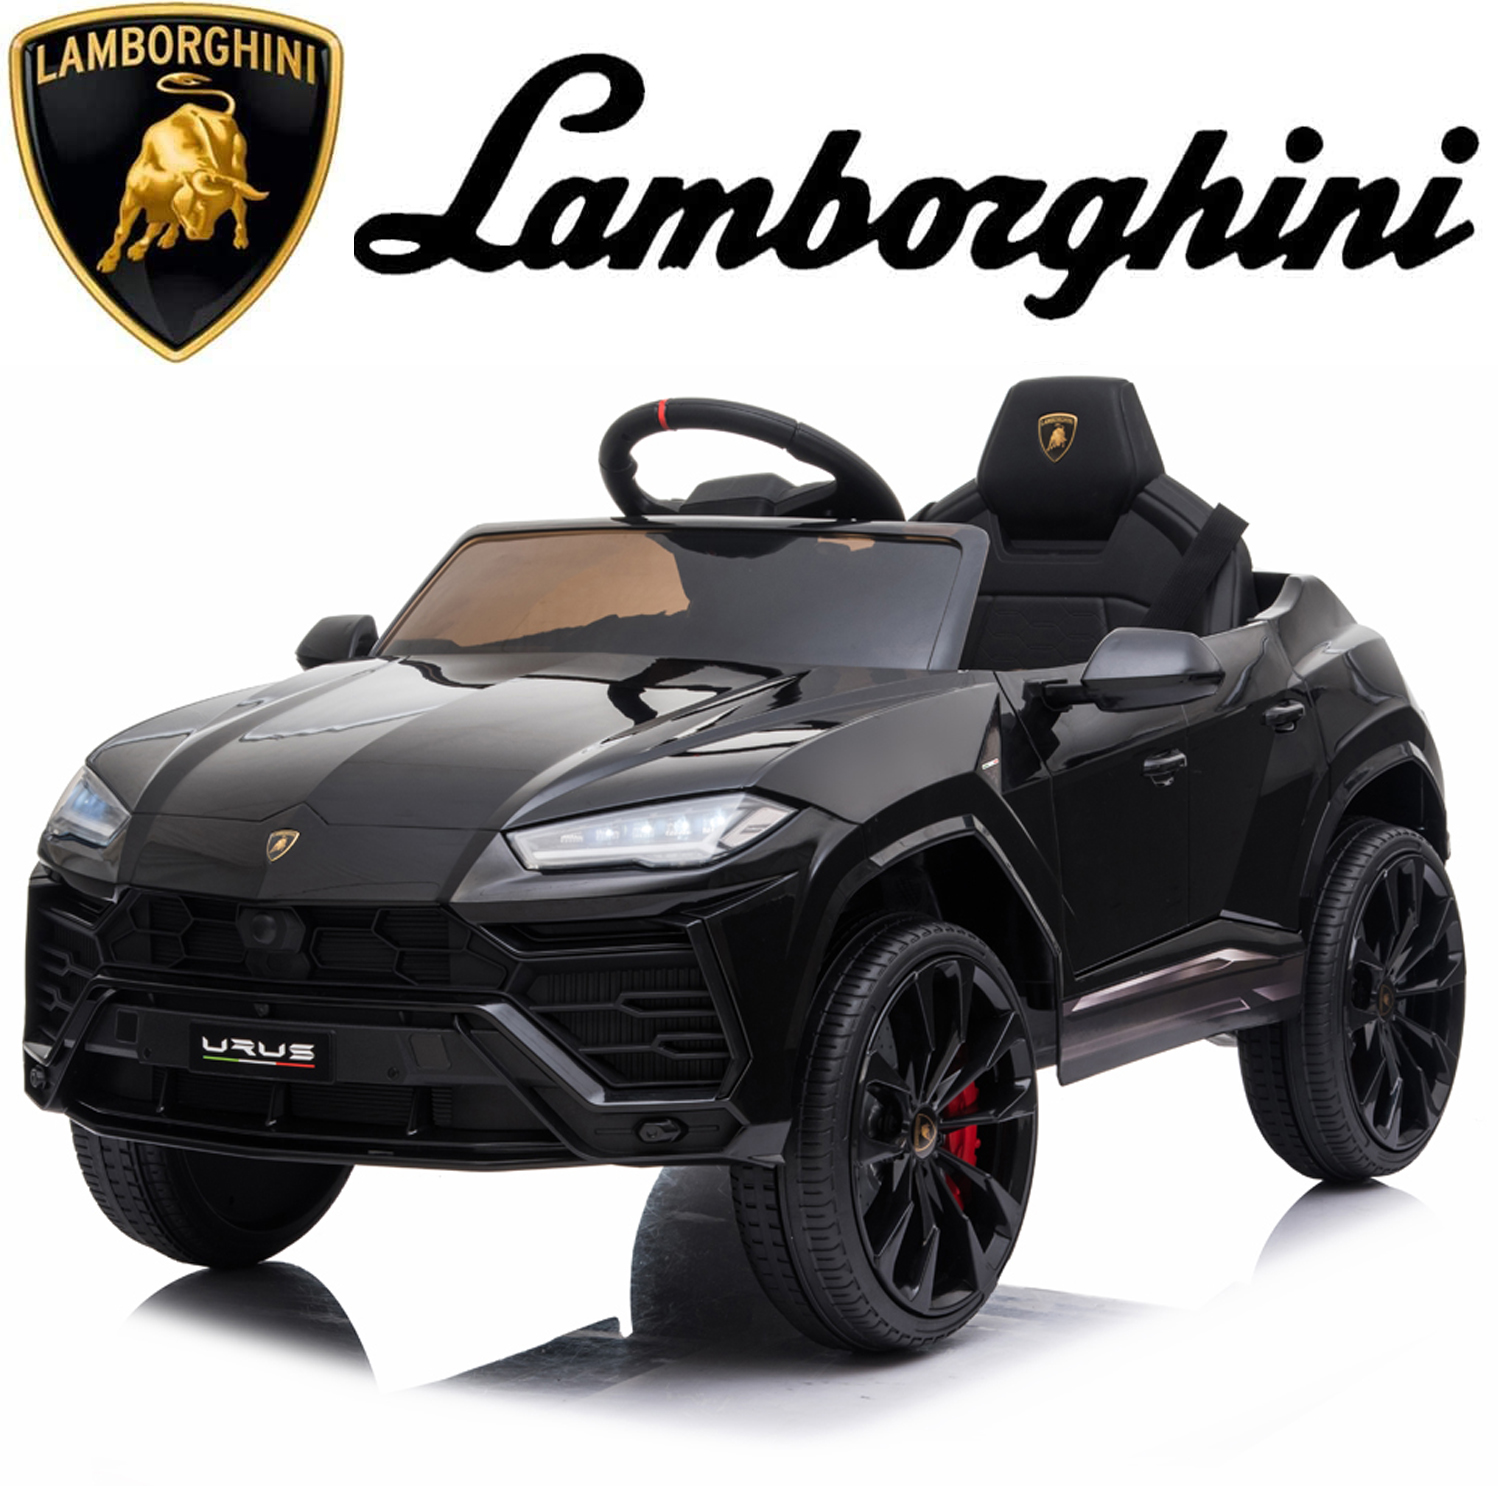 Lamborghini 12 V Powered Ride on Cars, Remote Control, Battery Powered, Black - image 1 of 10